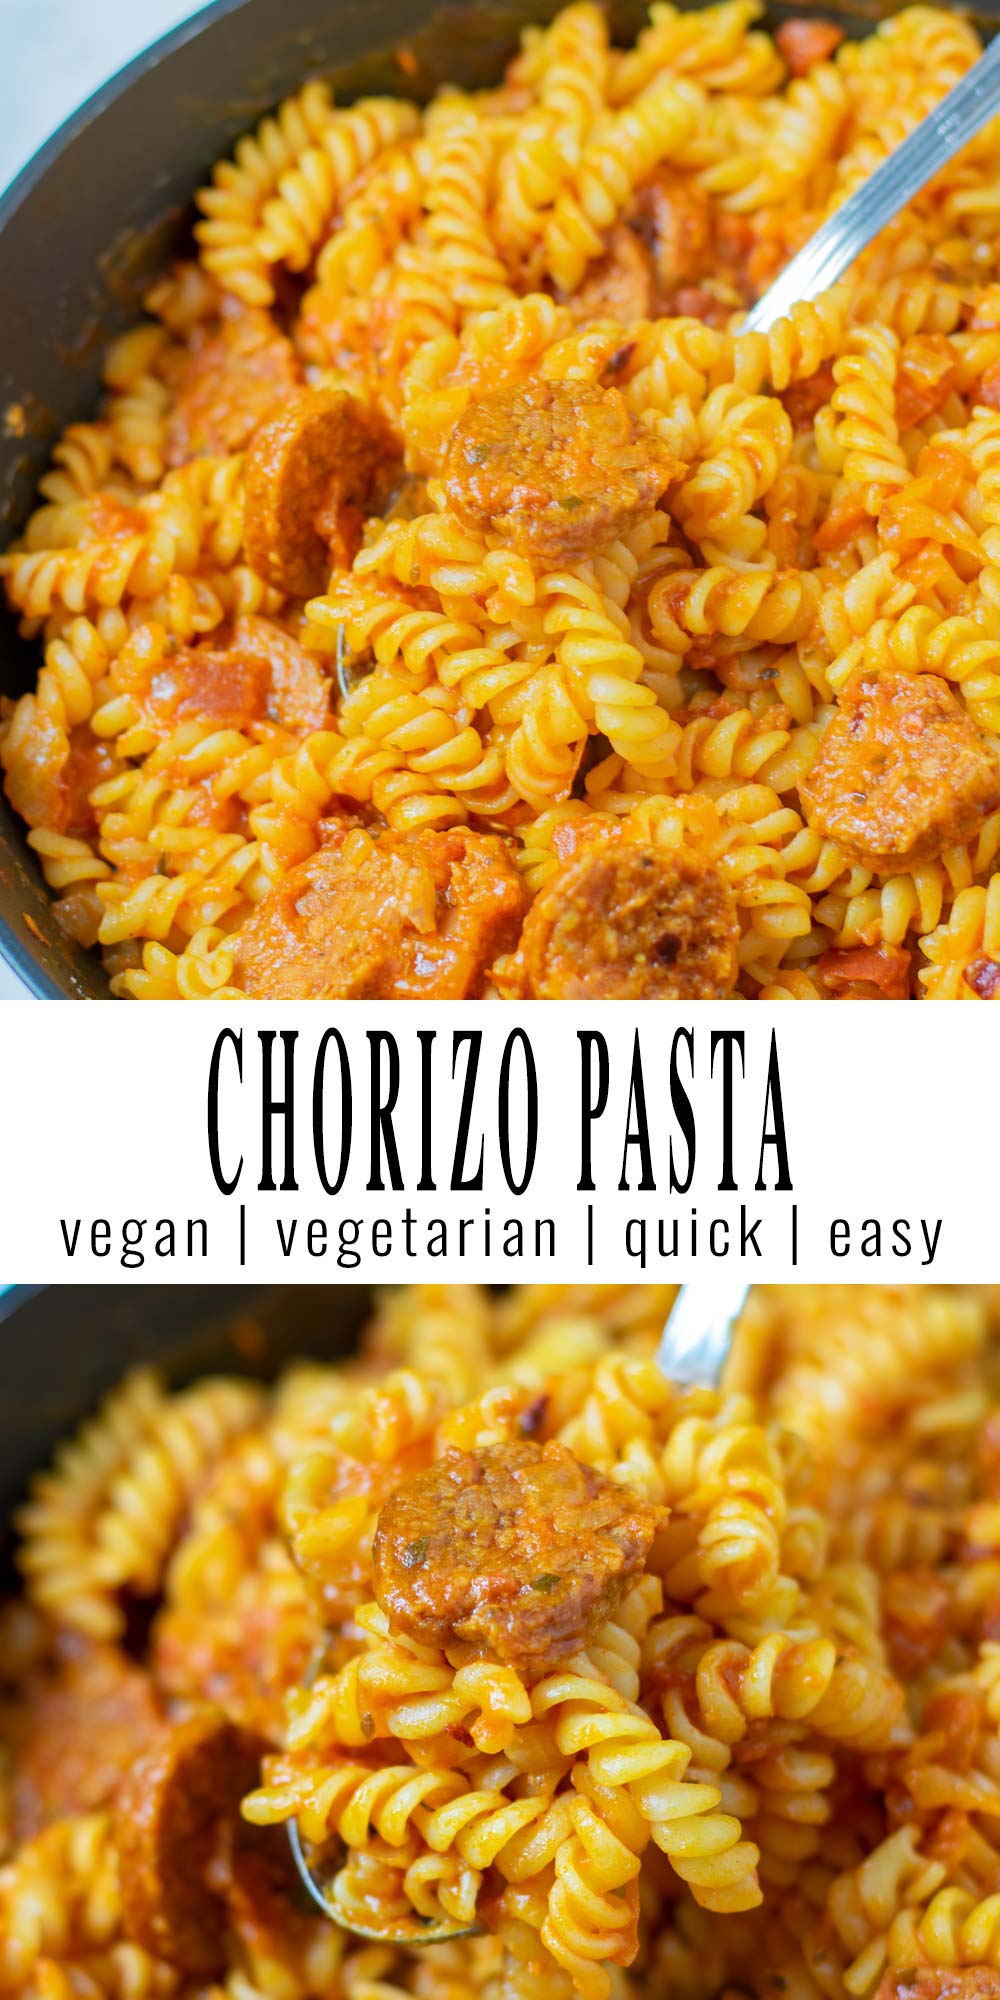 Collage of two pictures of the Chorizo Pasta with recipe title text.